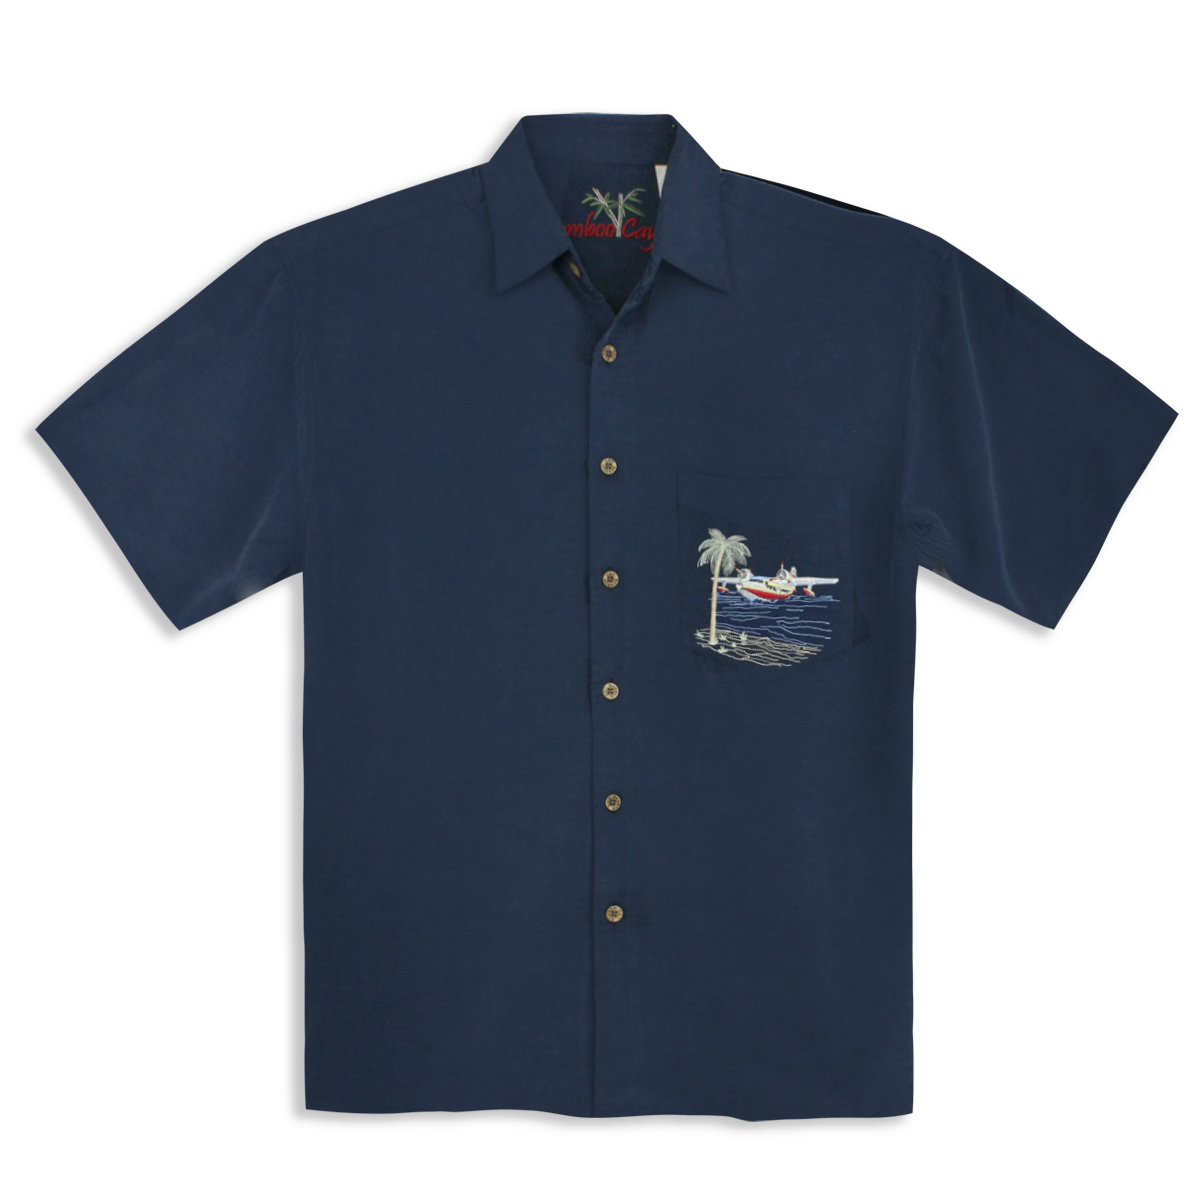 Bamboo Cay-Men’s Shirts-Catch of the Day-Navy Front view